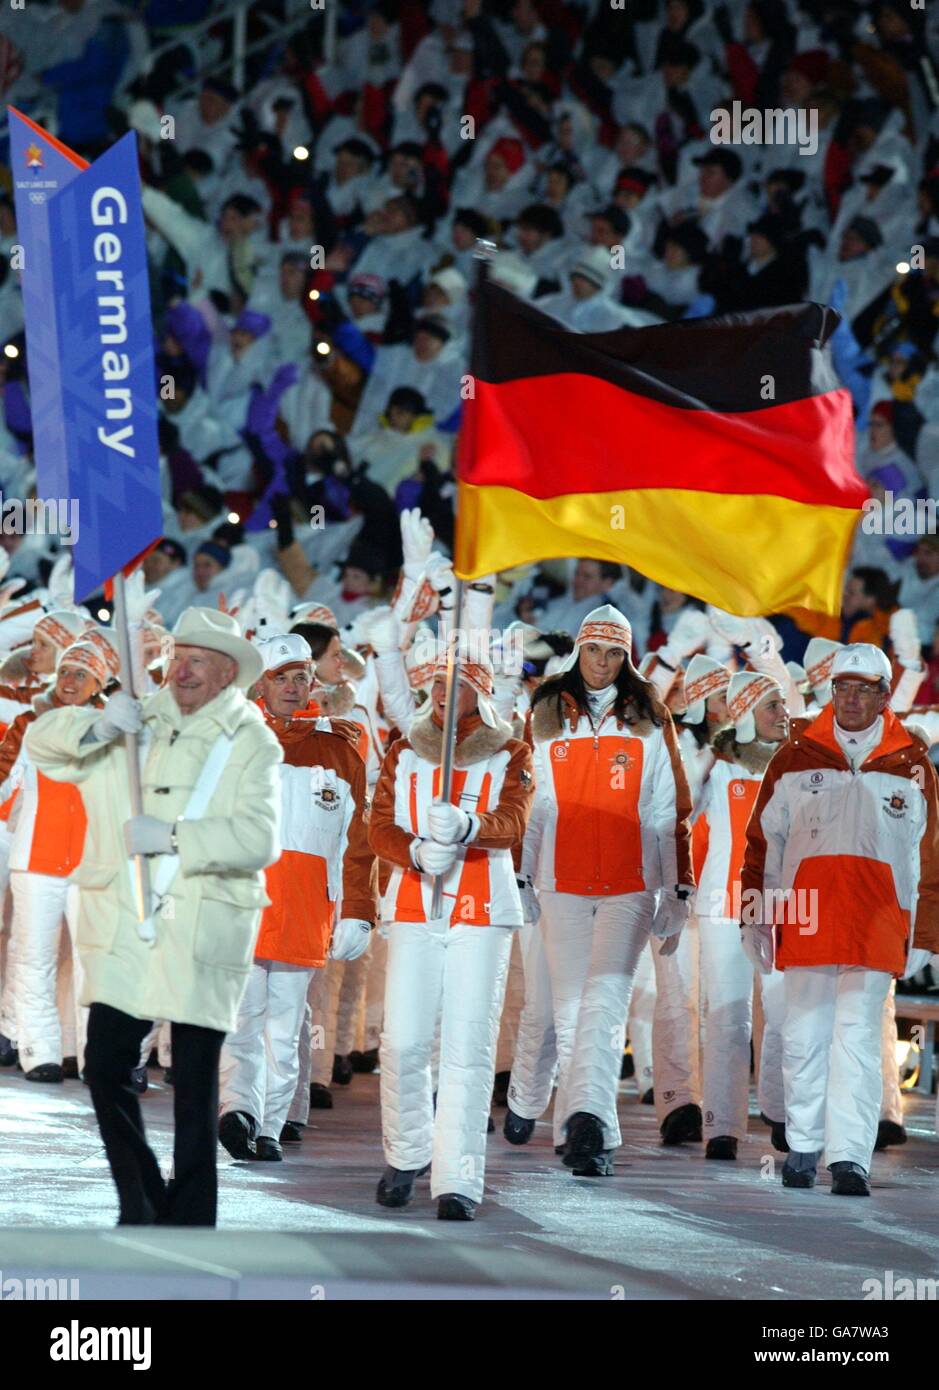 Winter Olympics - Salt Lake City 2002 - Opening Ceremony. Germany's flag bearer Hilde Gerg leads her team out Stock Photo